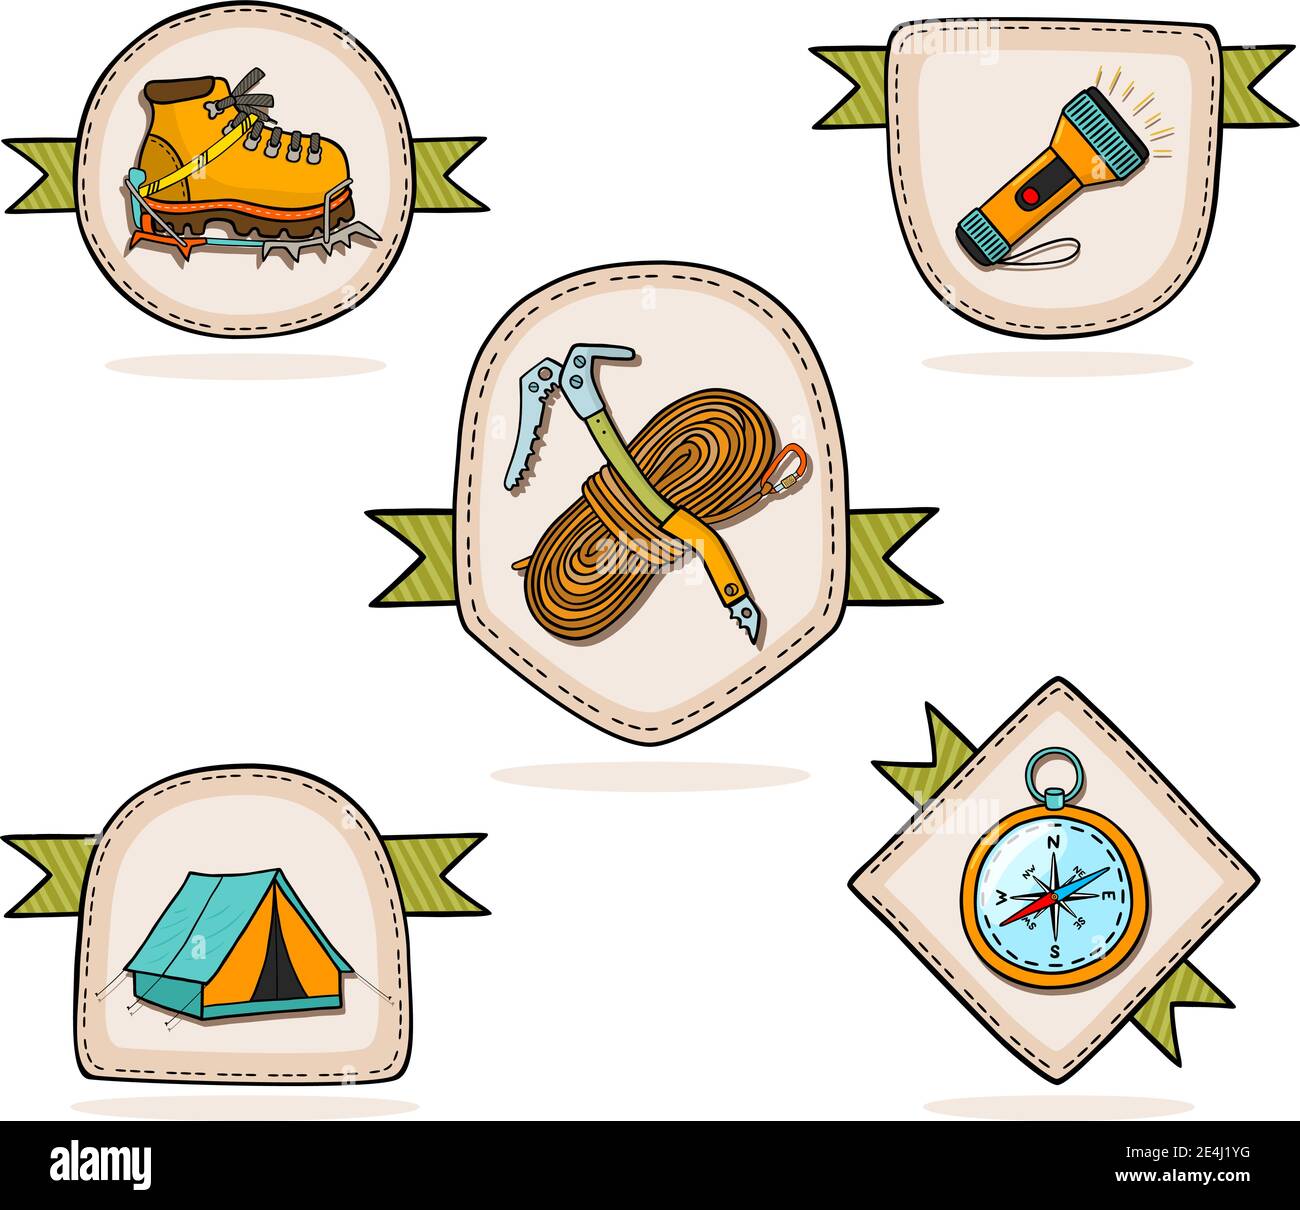 Mountain hiking set of badges vector illustration Stock Vector